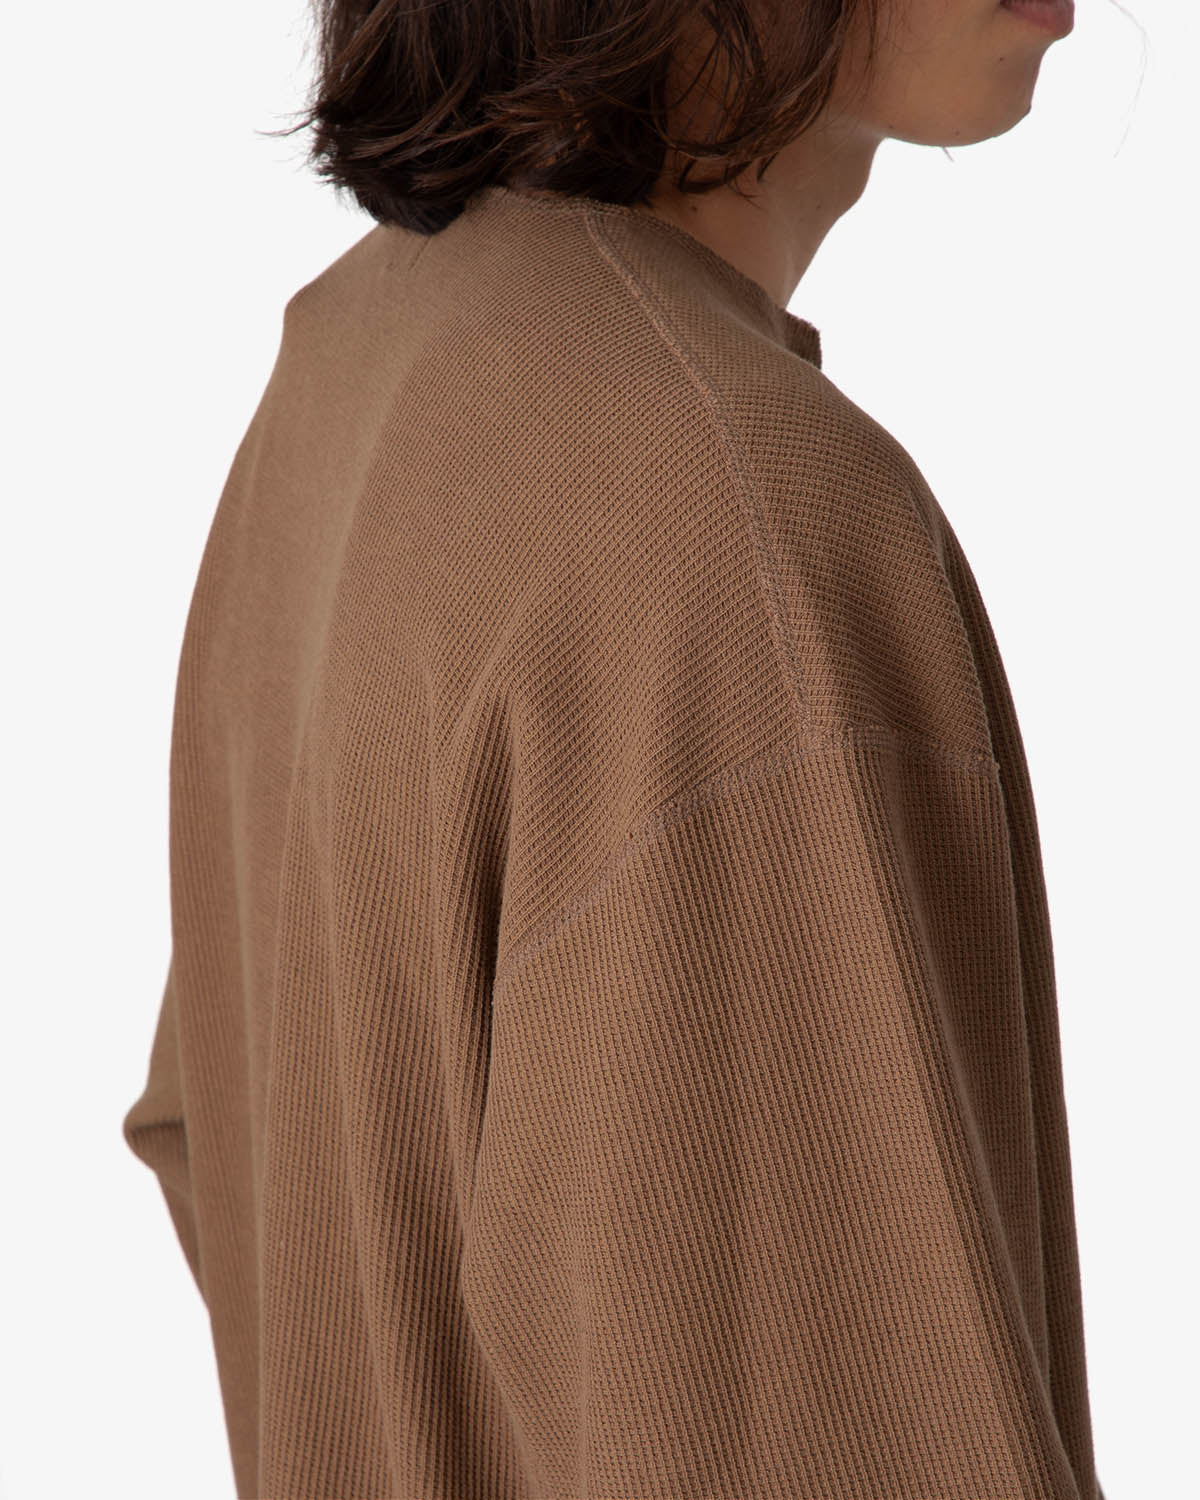 ROUGH&SMOOTH THERMAL OVER-NECK